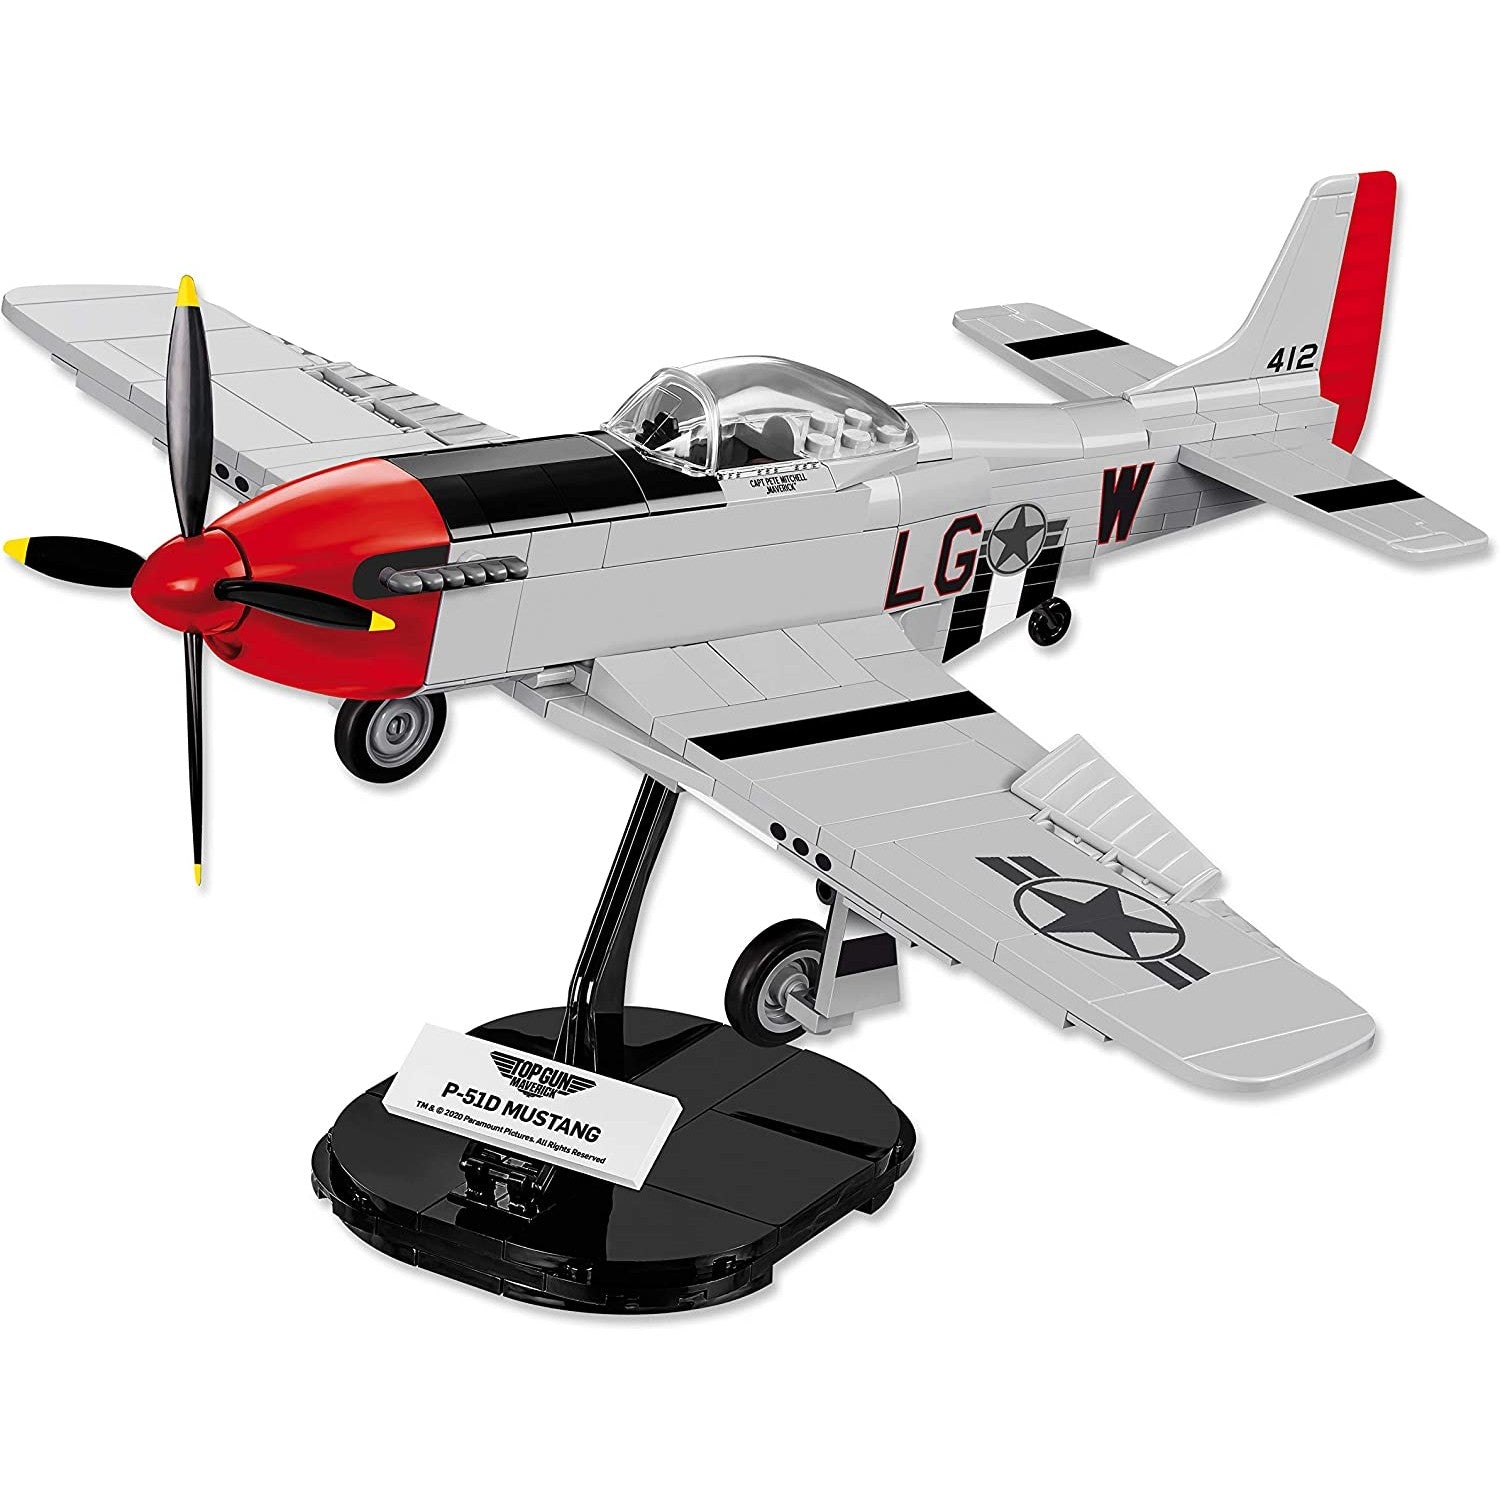 A model miniature version of the Mustang P-51D from the Top Gun movie.